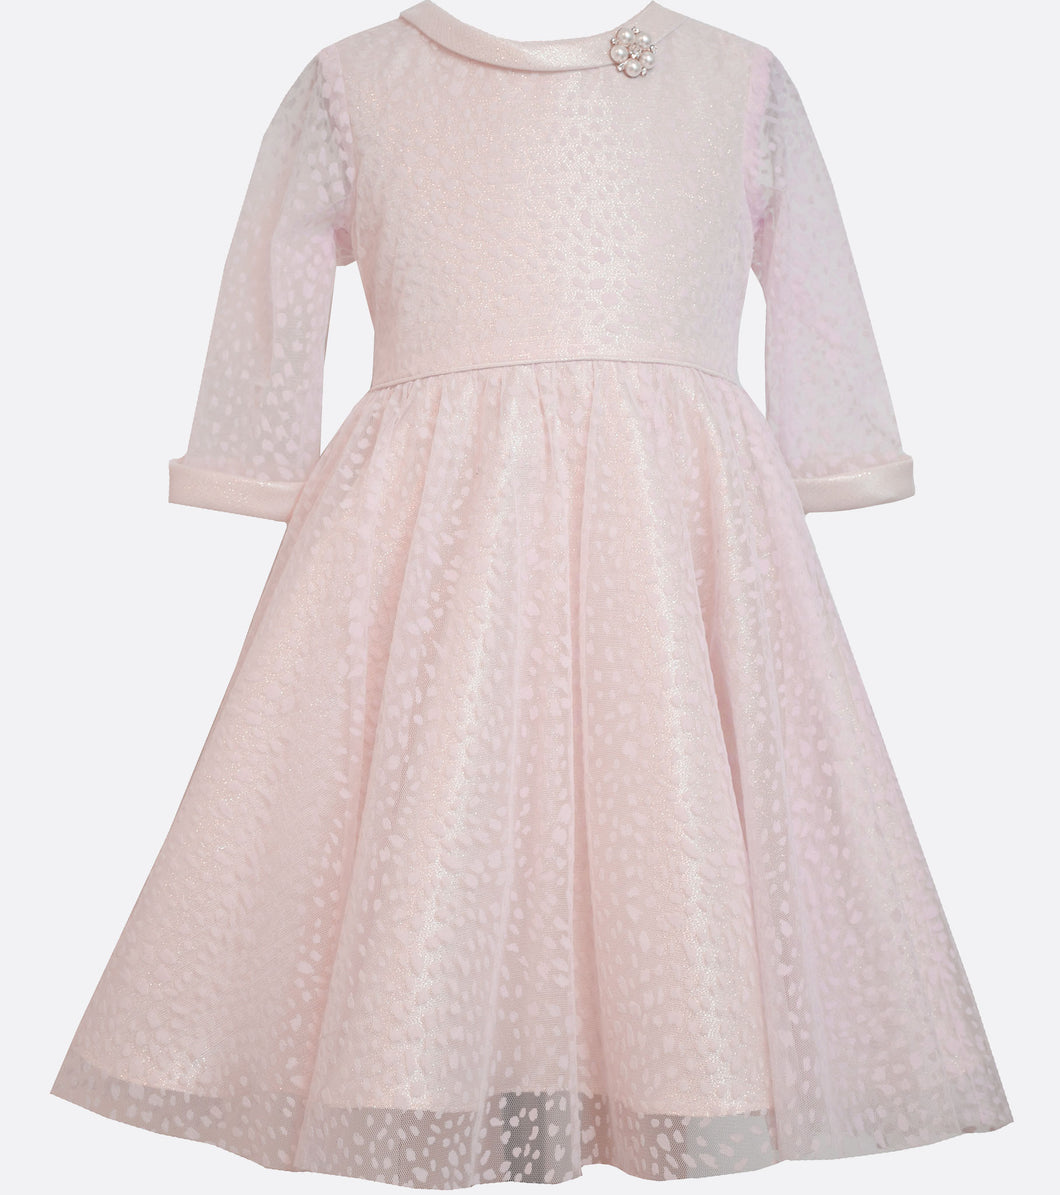 Bonnie Jean plush pink and gold princess dress with pearl broach.